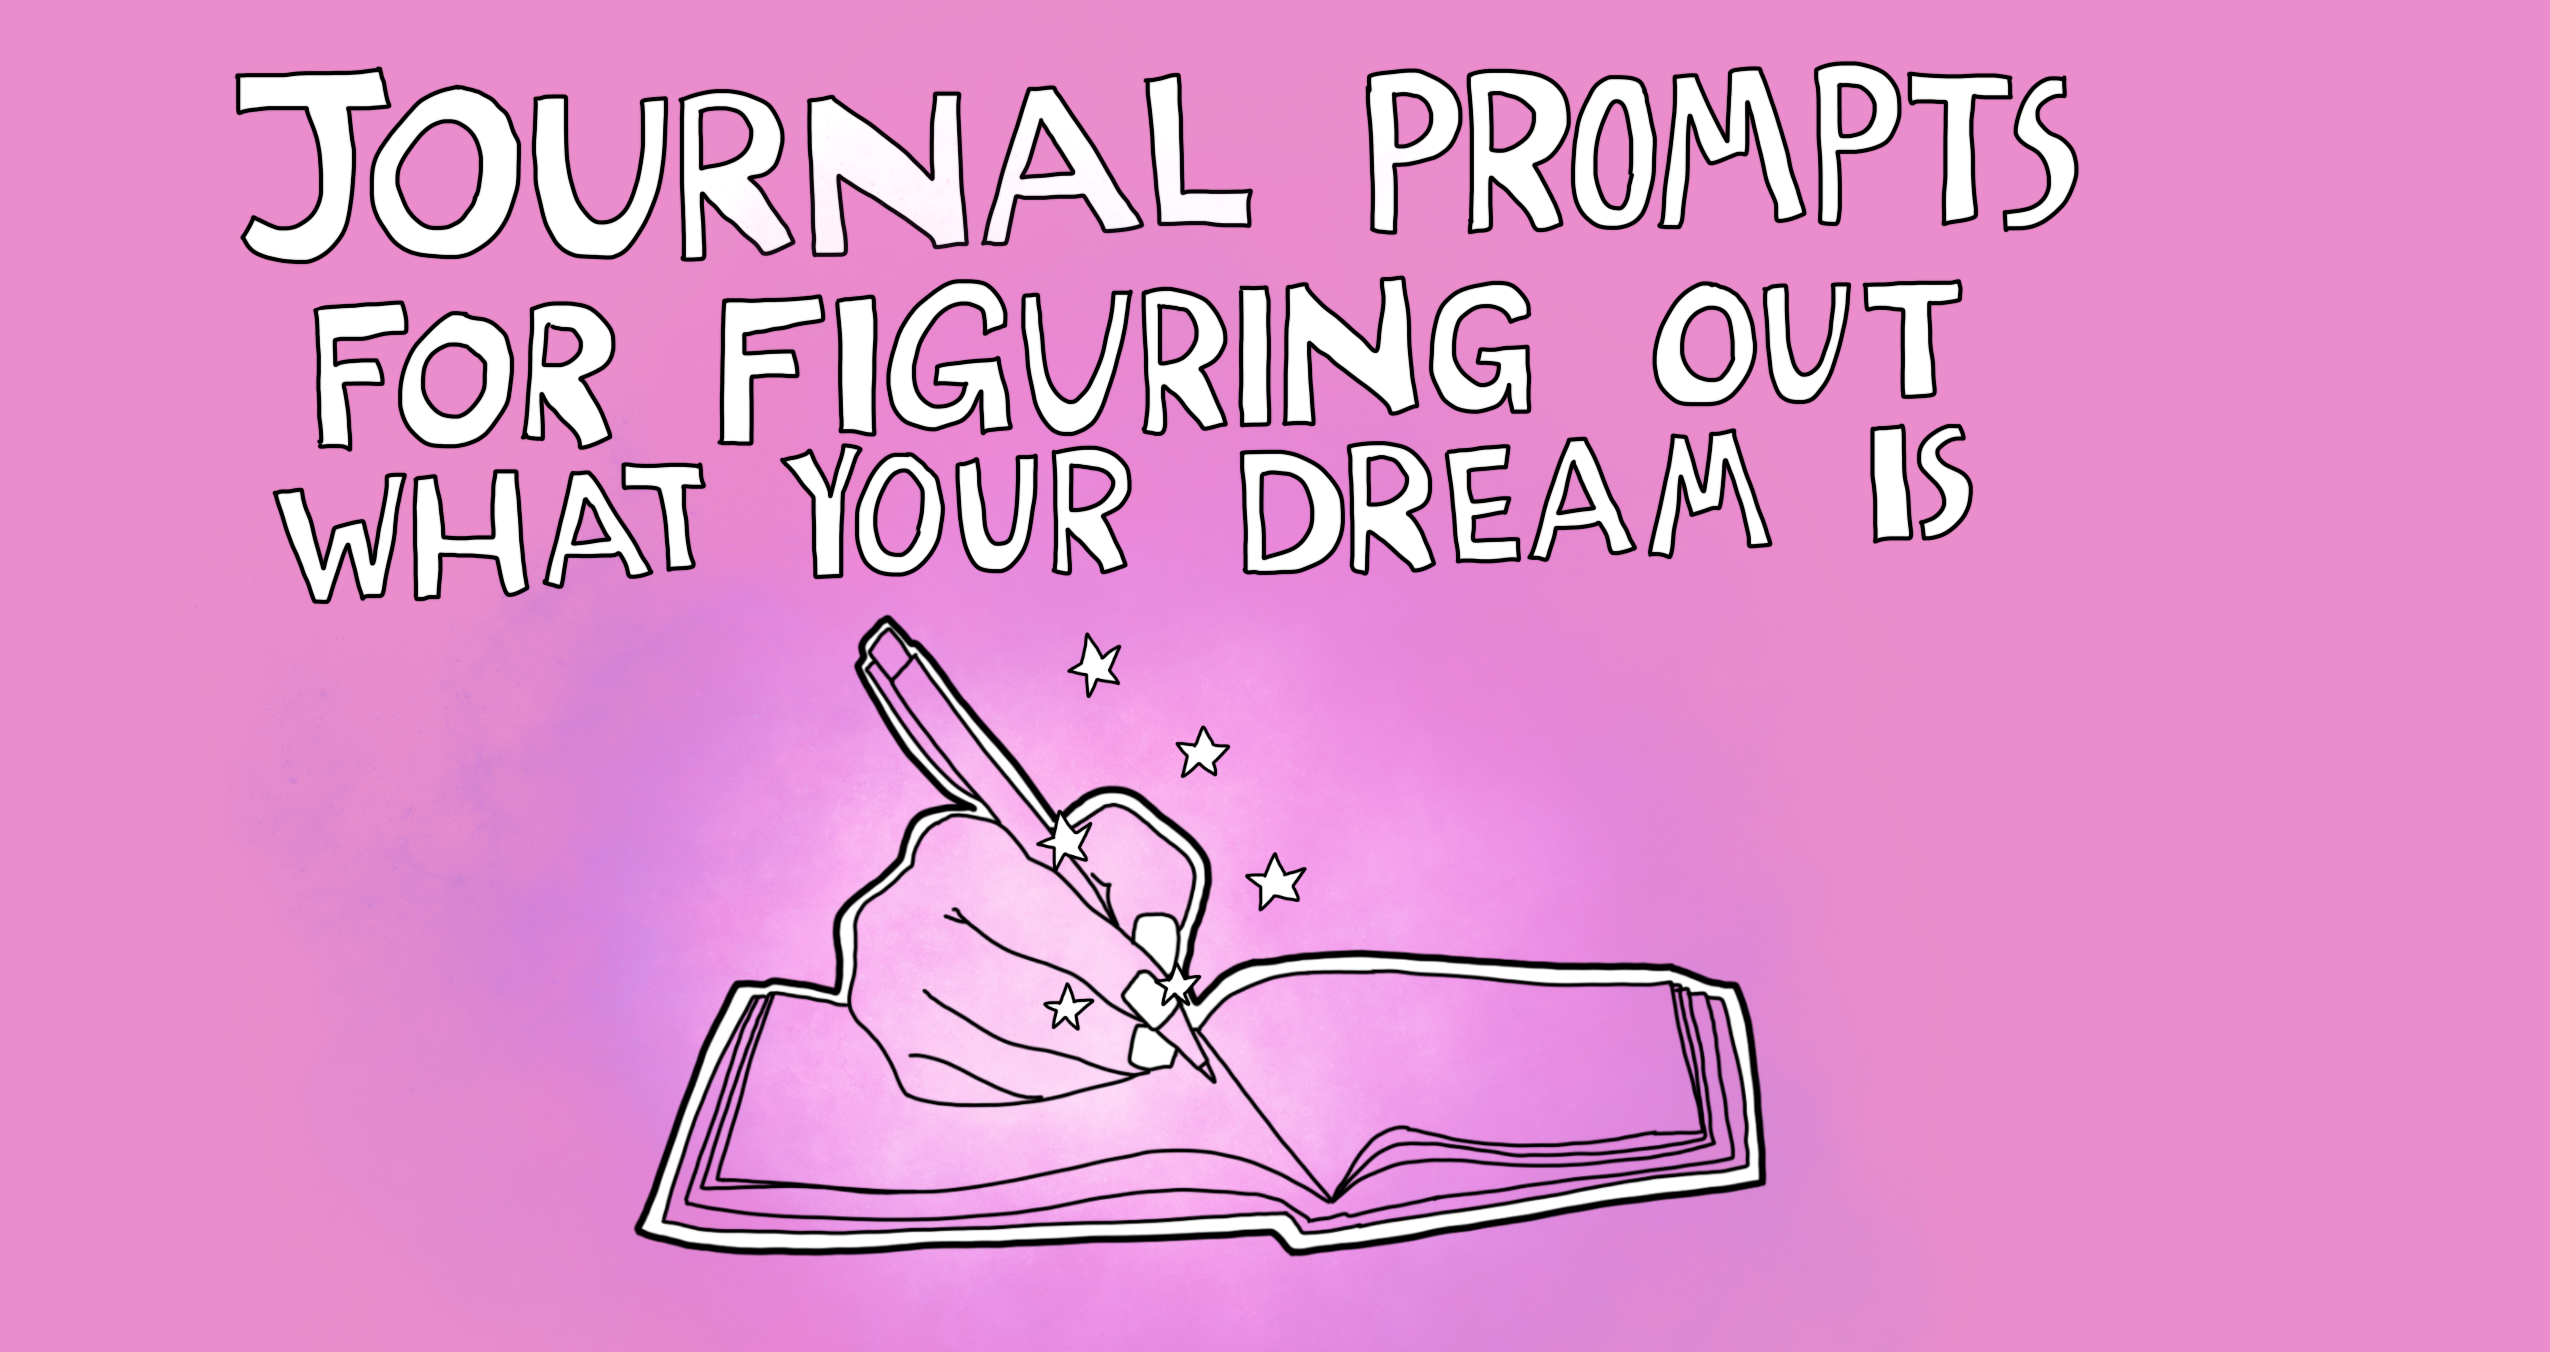 Journal Prompts for Finding your Dream